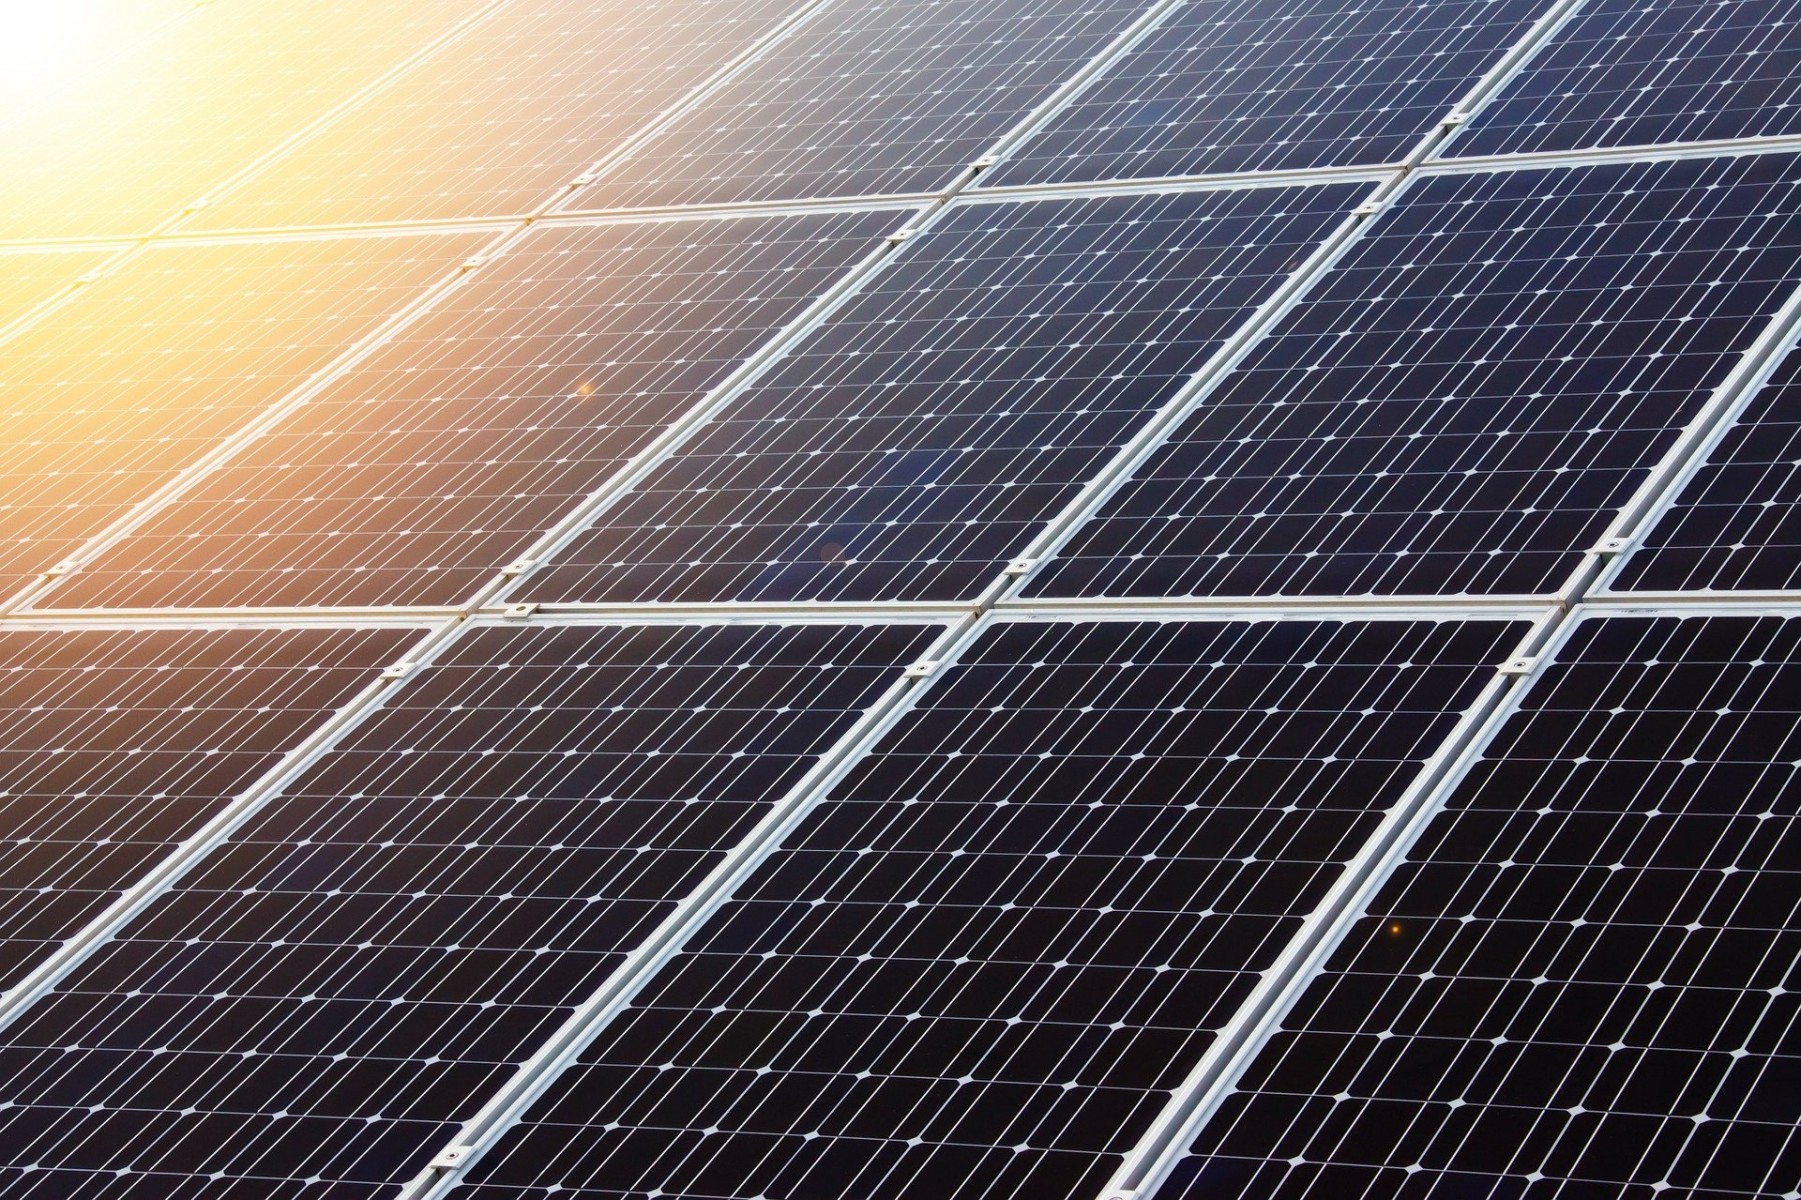 UK researchers help cut costs of solar technology